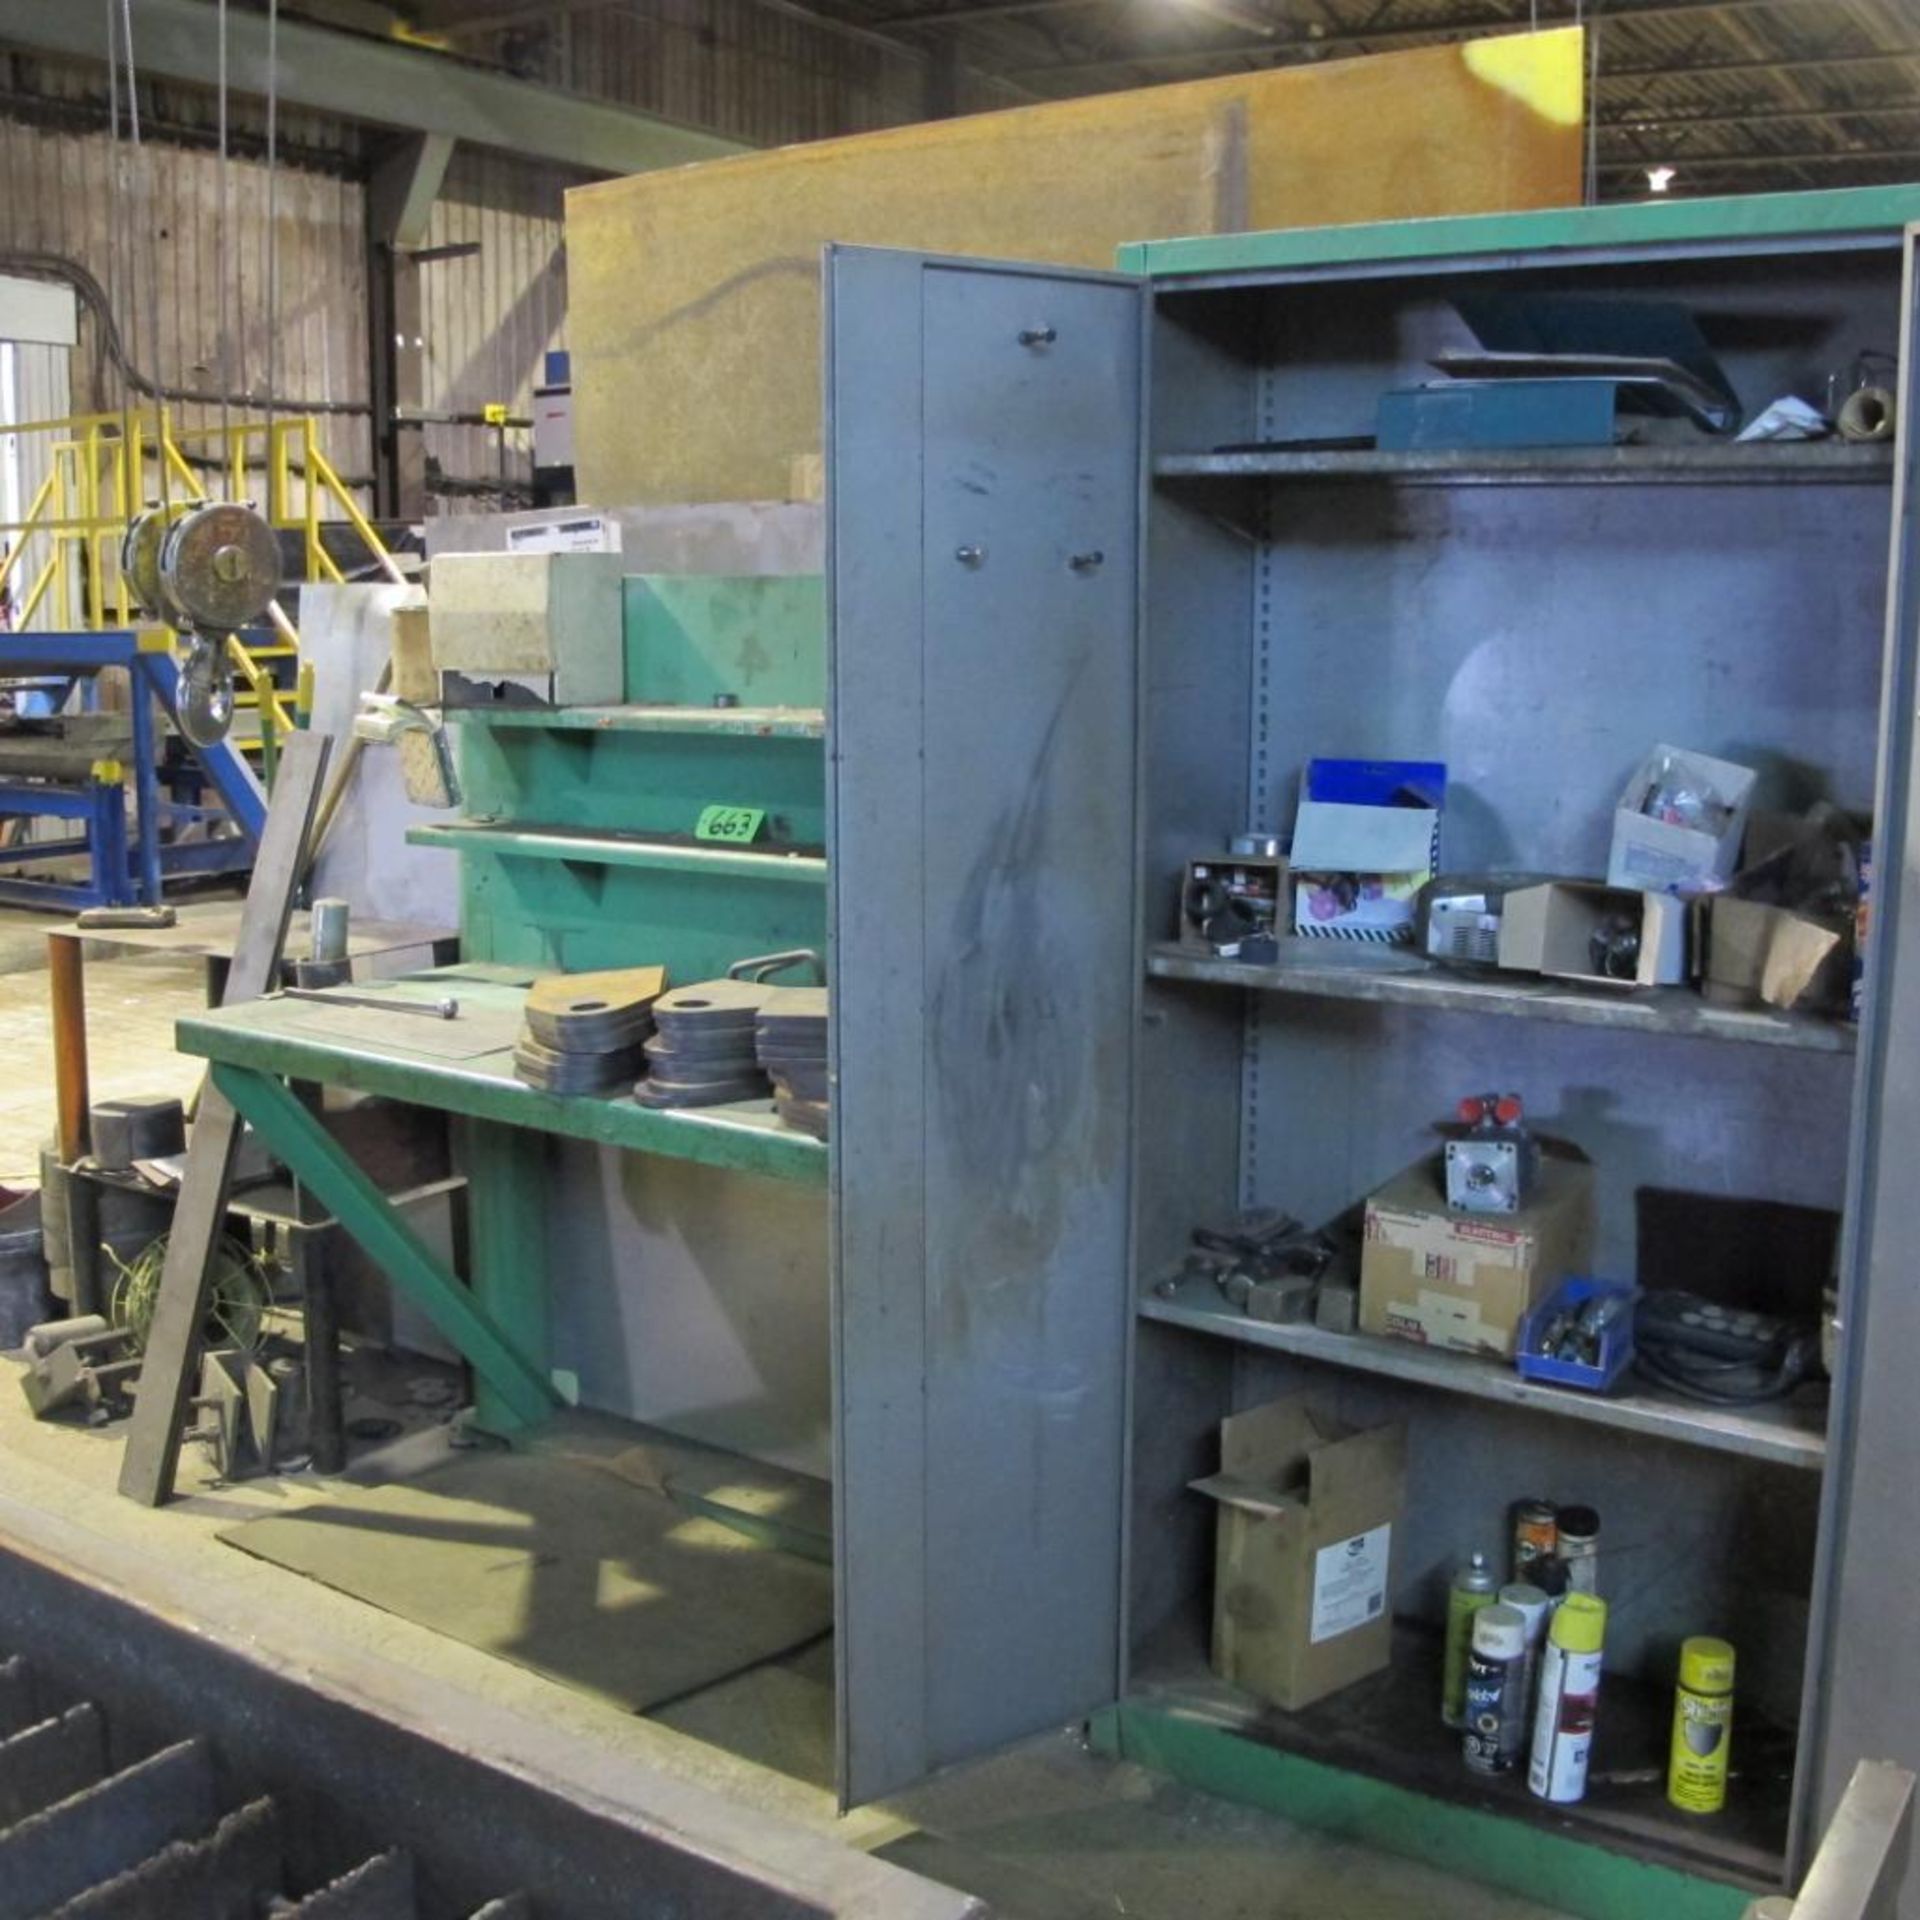 WORK BENCH, 2 DOOR CABINET W/SUPPLIES, SMALL TABLE W/CONTENTS (PLASMA CUTTING BAY)